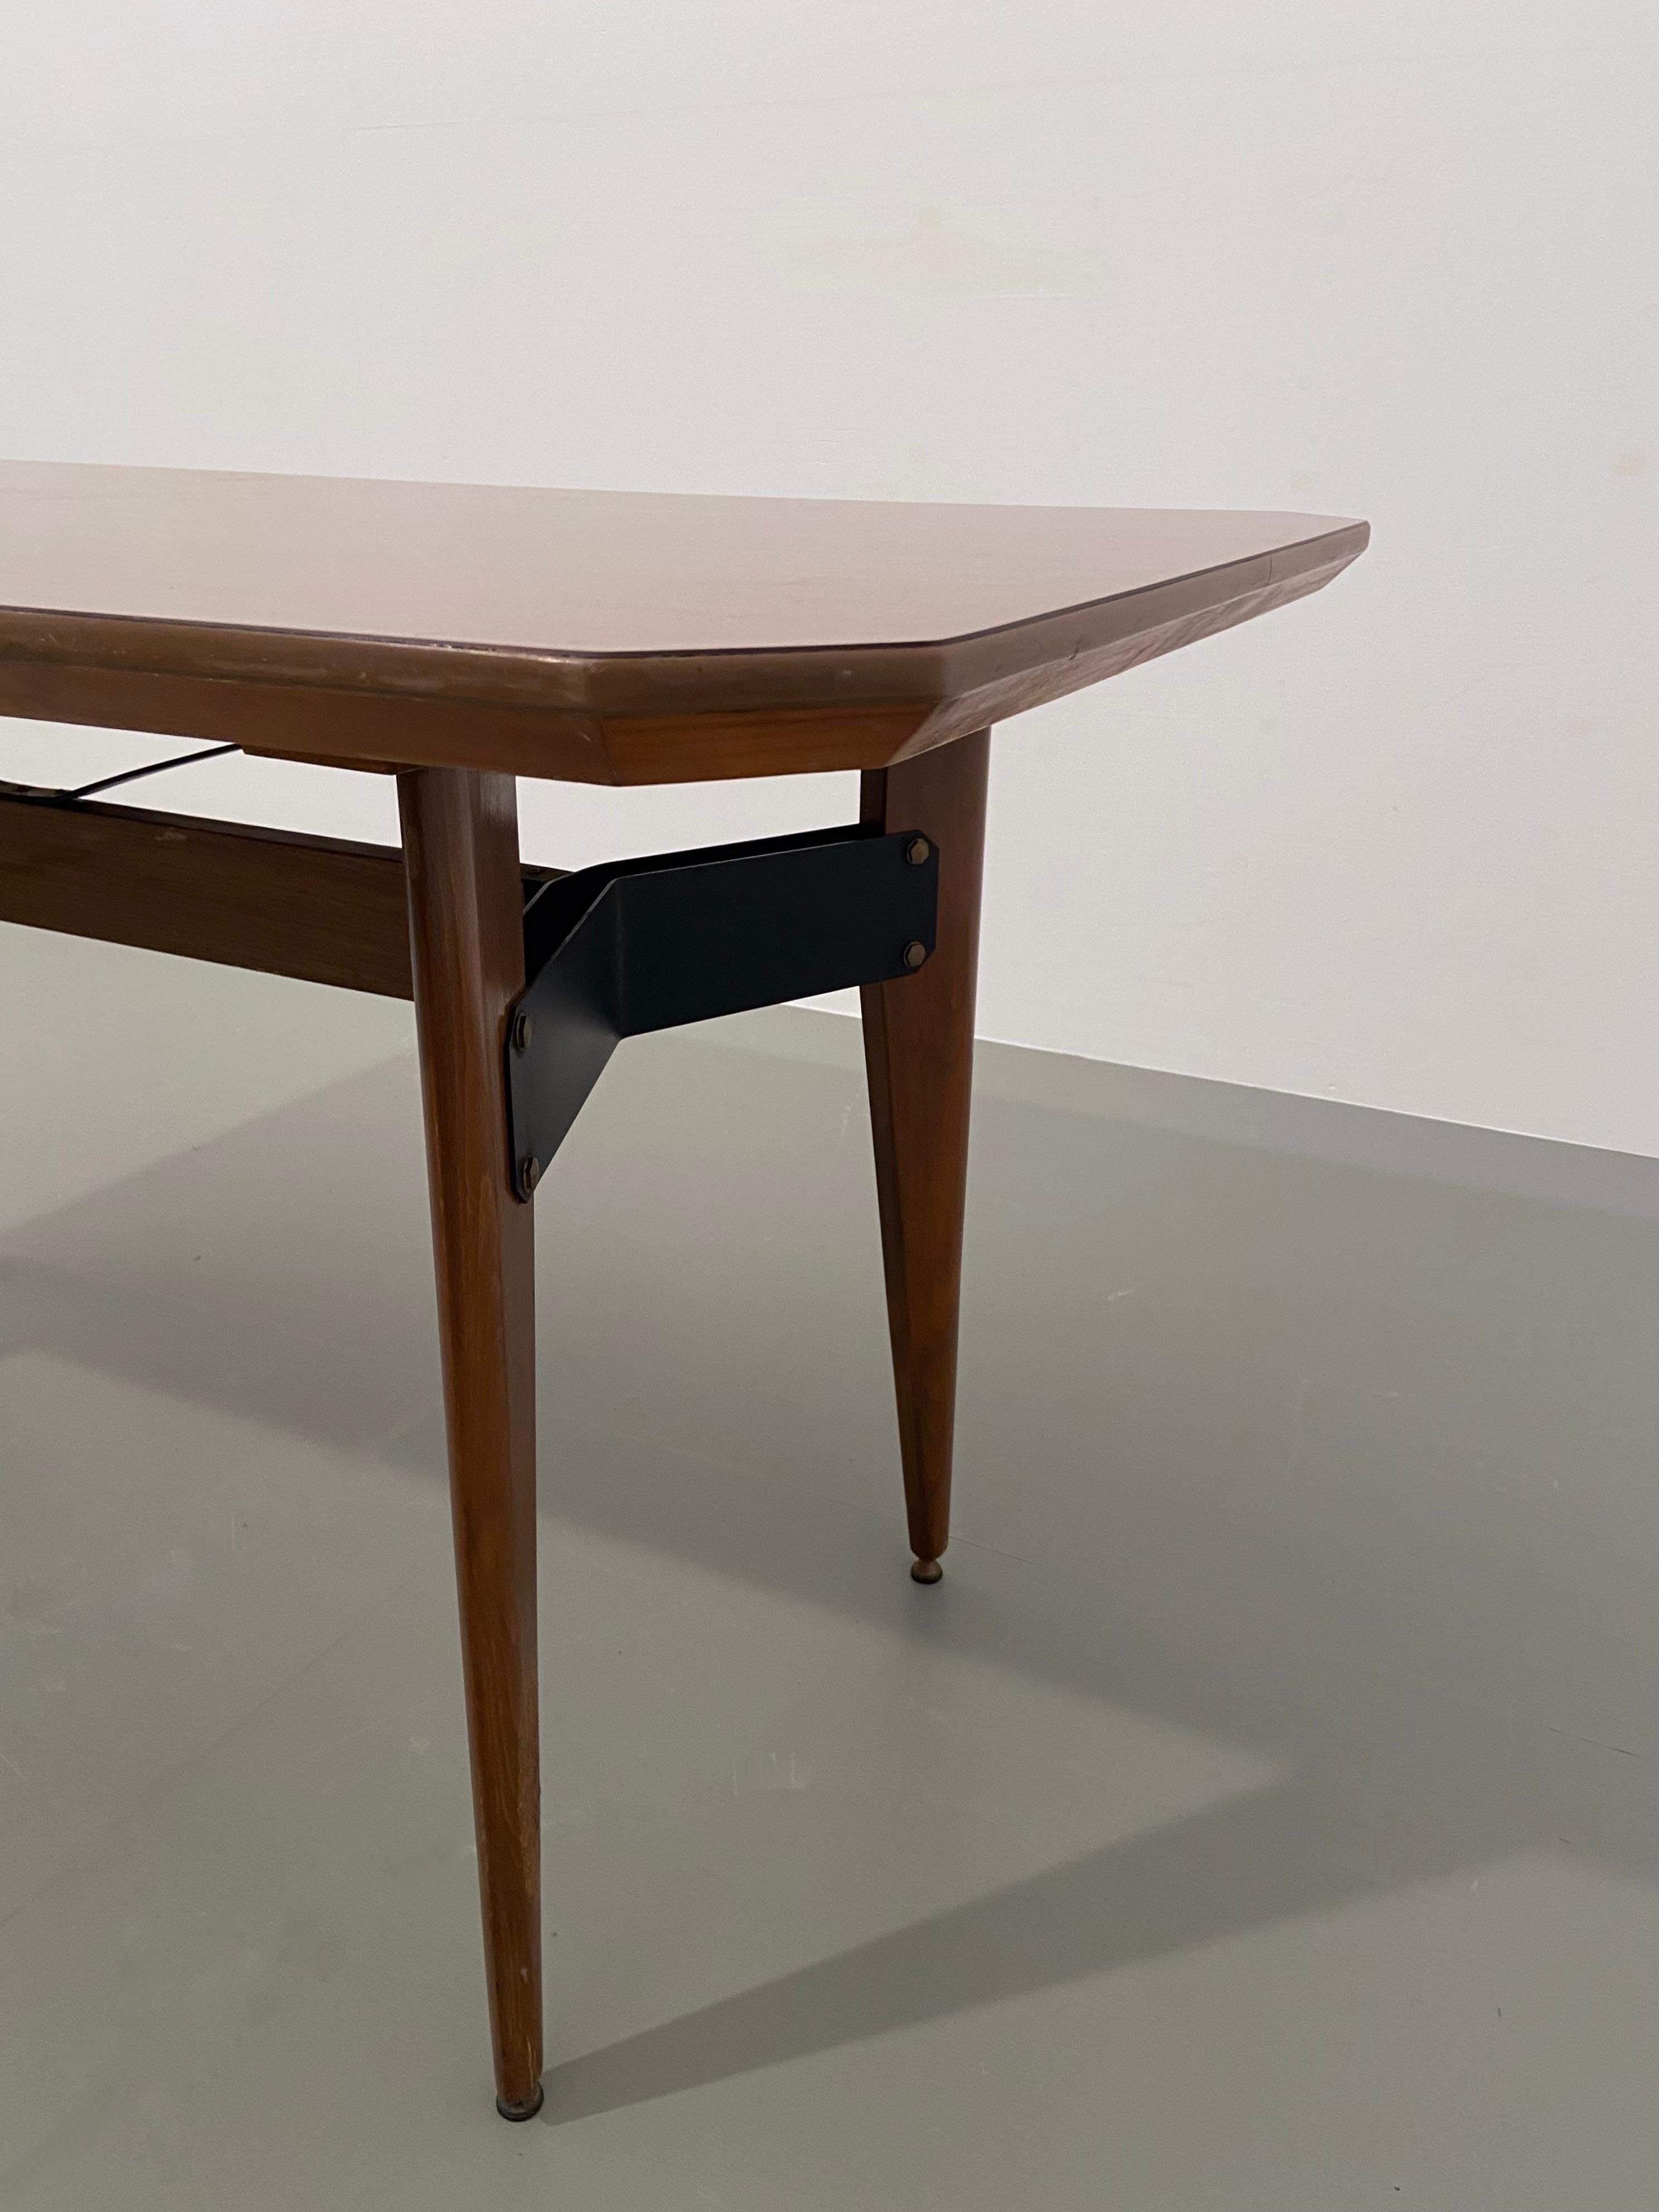 Carlo Ratti Dining Table in Wood and Metal, Italy, 1960's In Good Condition For Sale In Uithoorn, NL